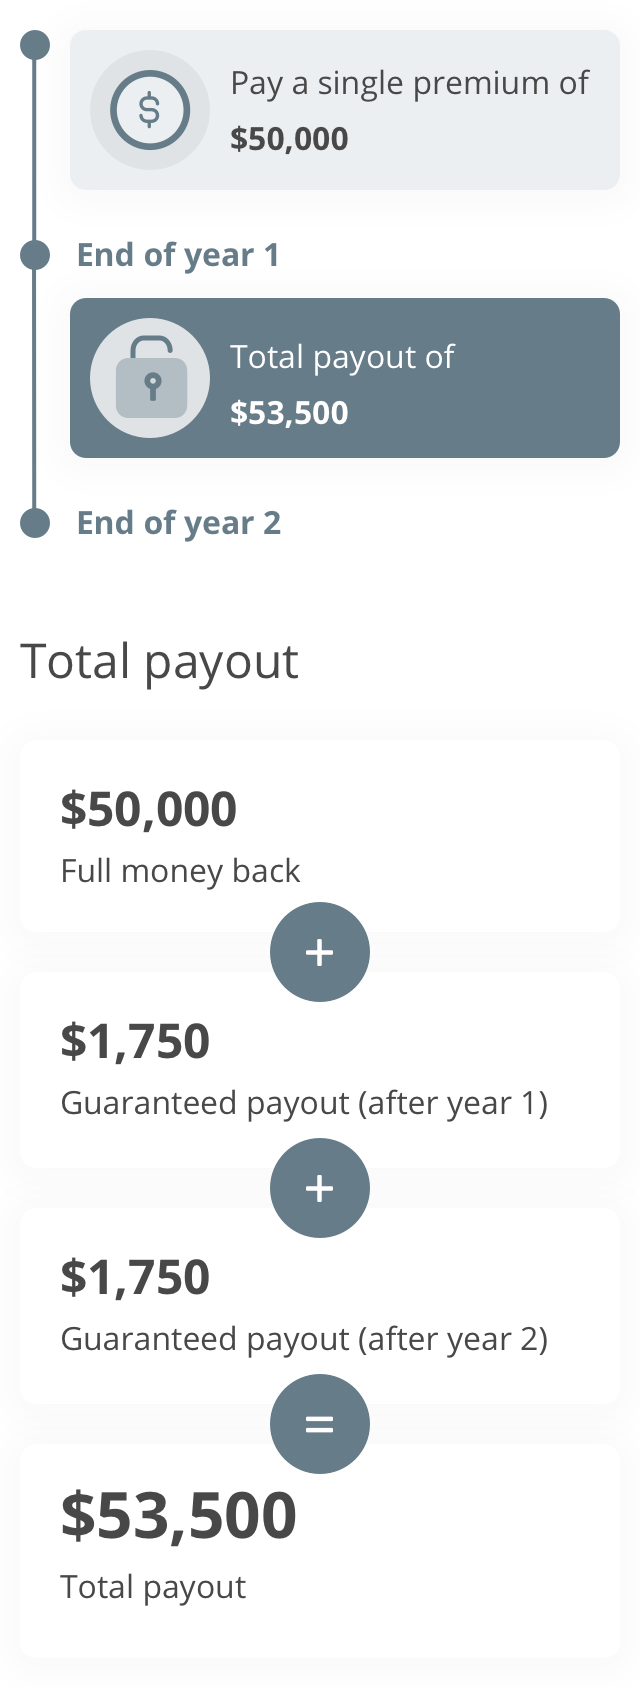 Total illustrated payout upon maturity